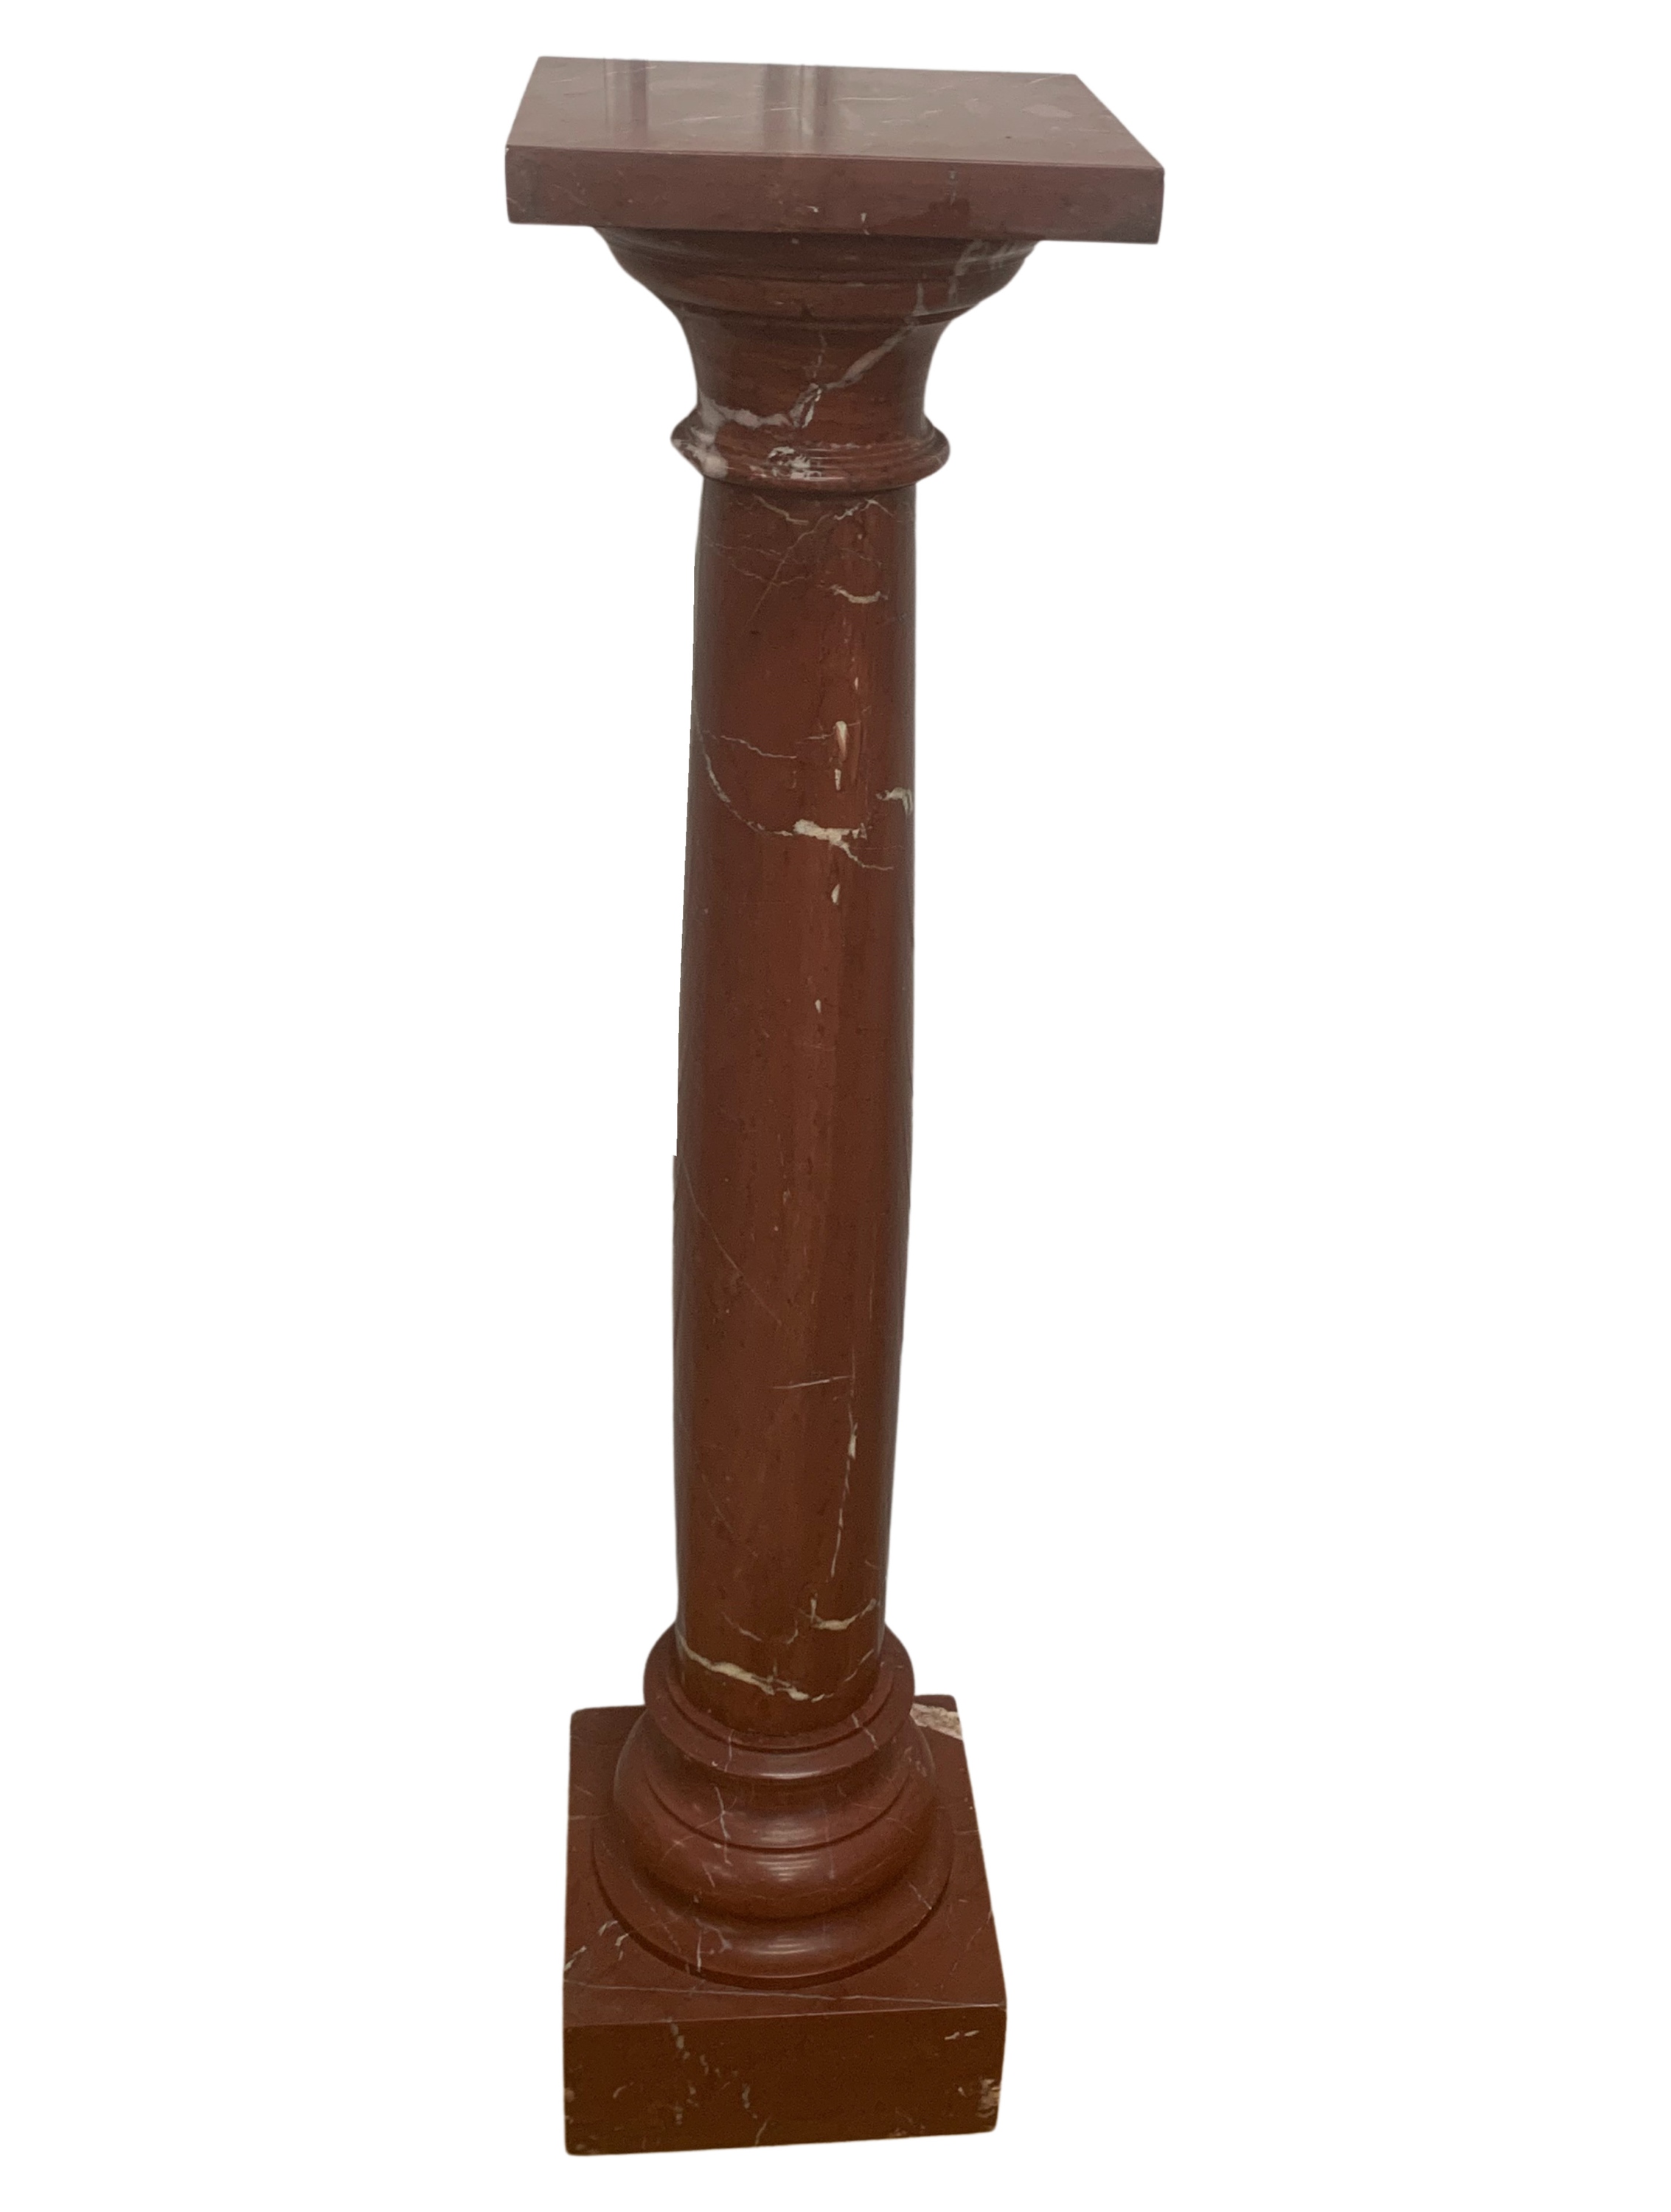 49 FRENCH ROUGE MARBLE PEDESTAL 2f8adf